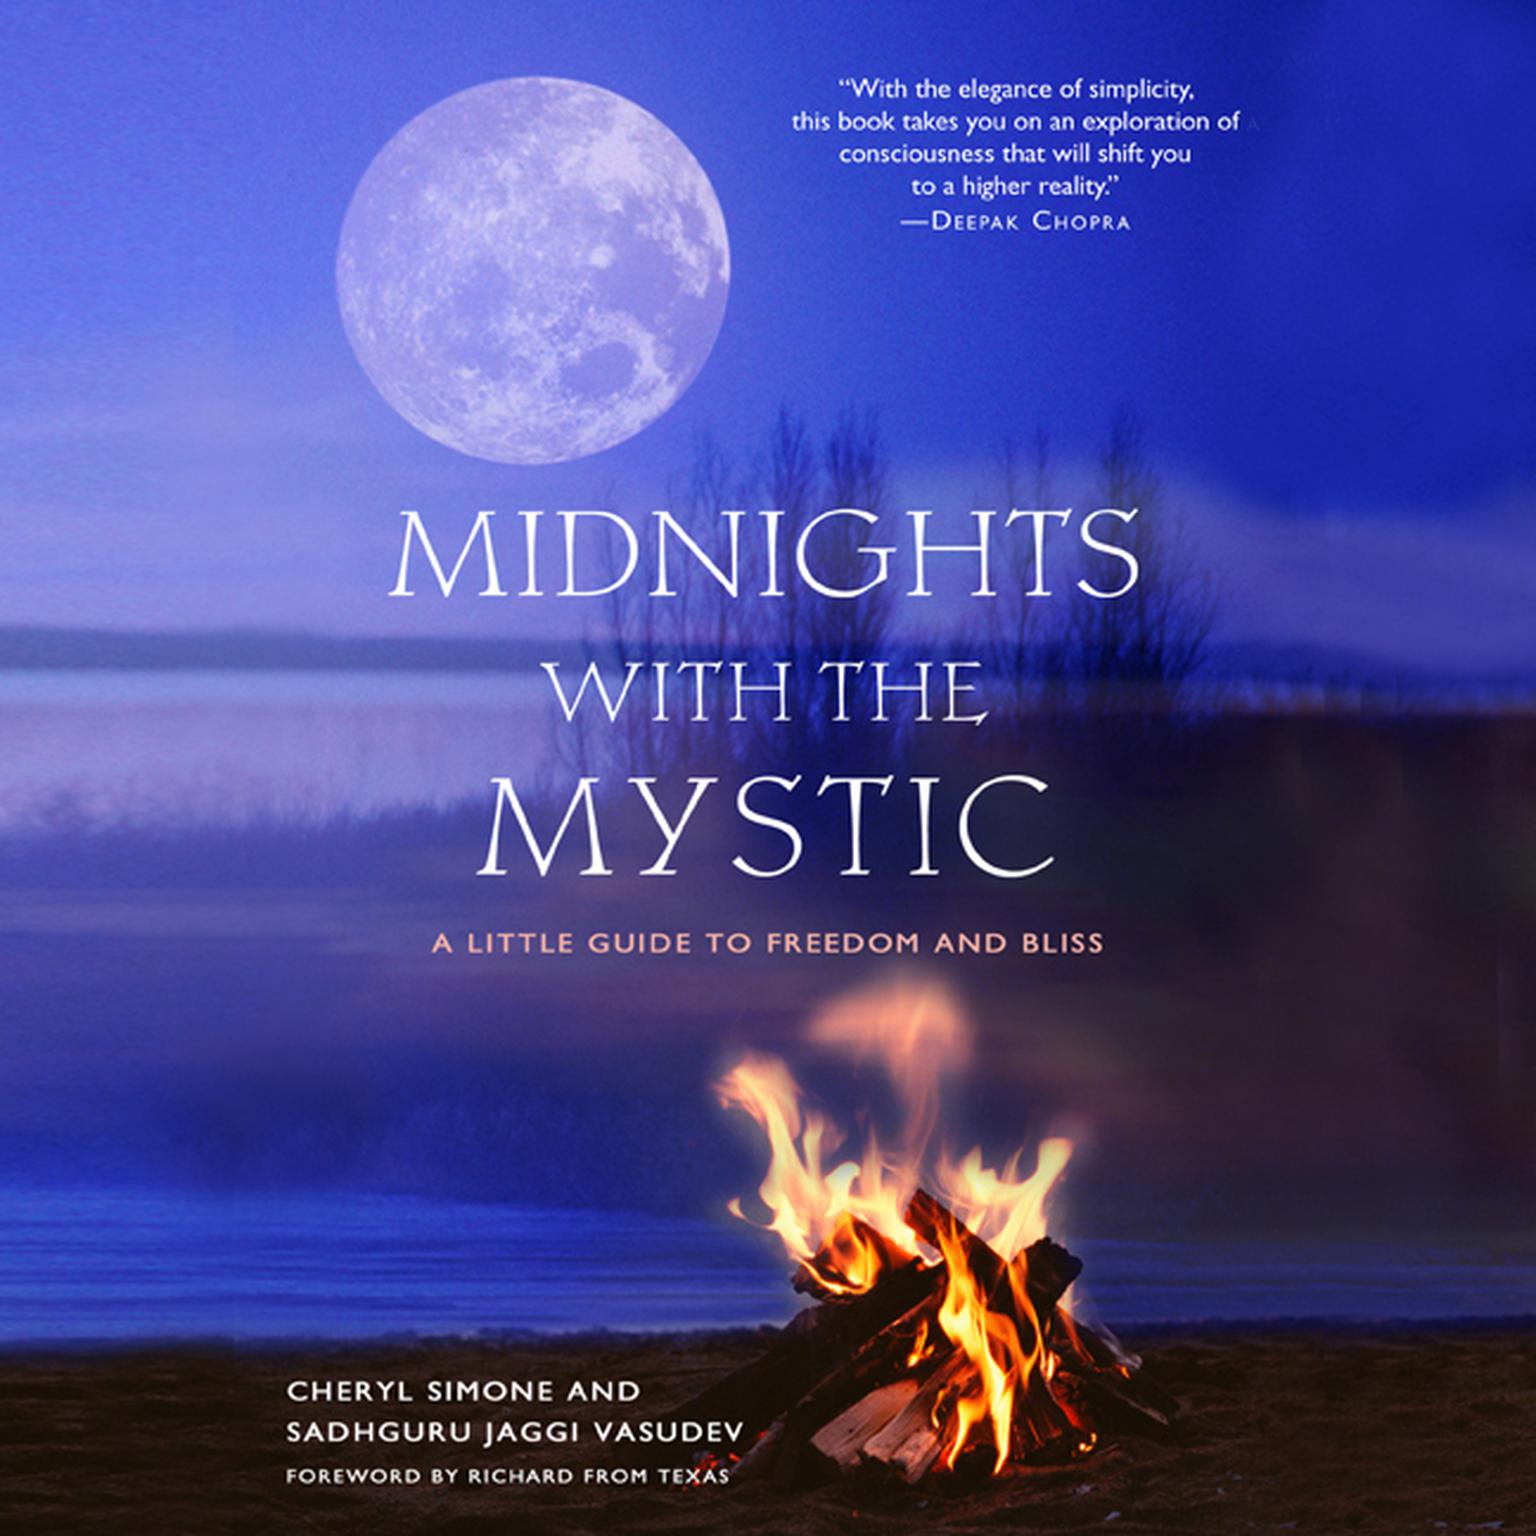 Midnights with the Mystic: A Little Guide to Freedom and Bliss Audiobook, by Cheryl Simone